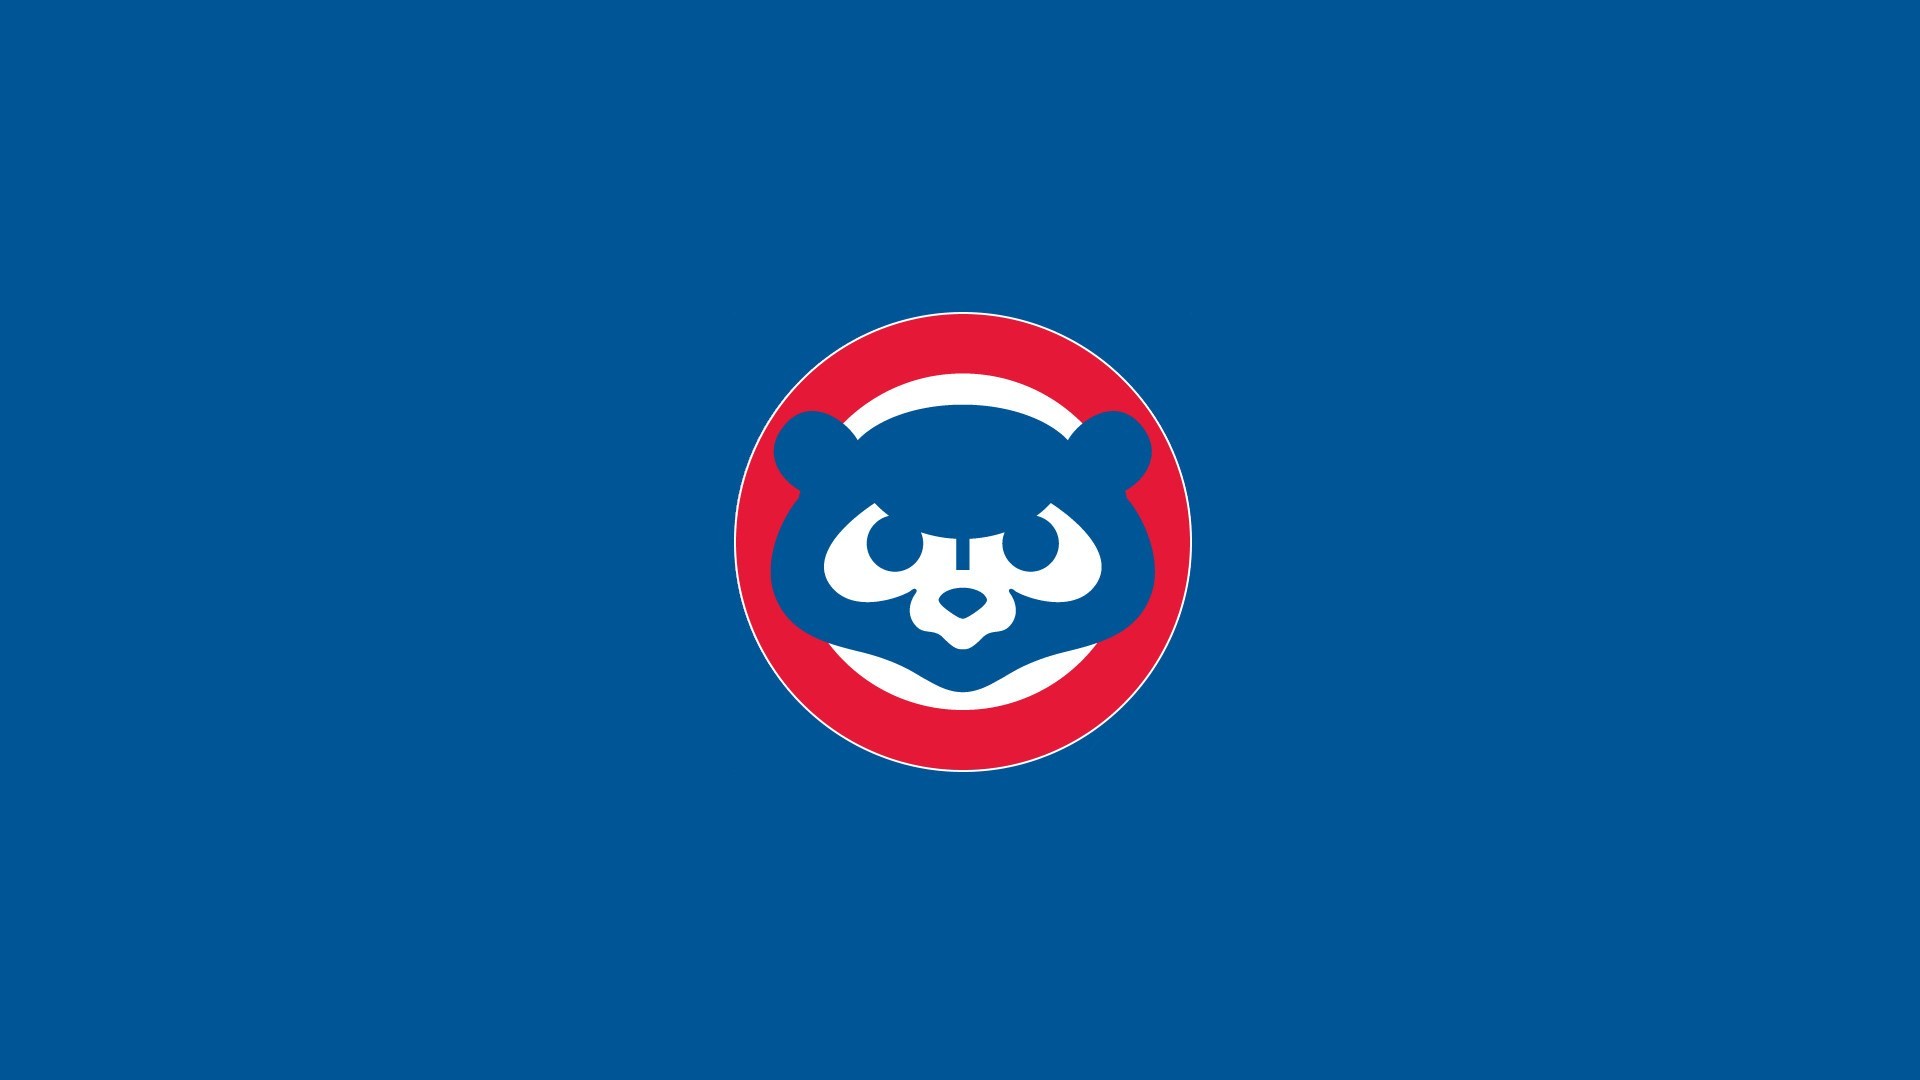 1920x1080 Chicago Cubs 2018 Wallpaper 72 Images